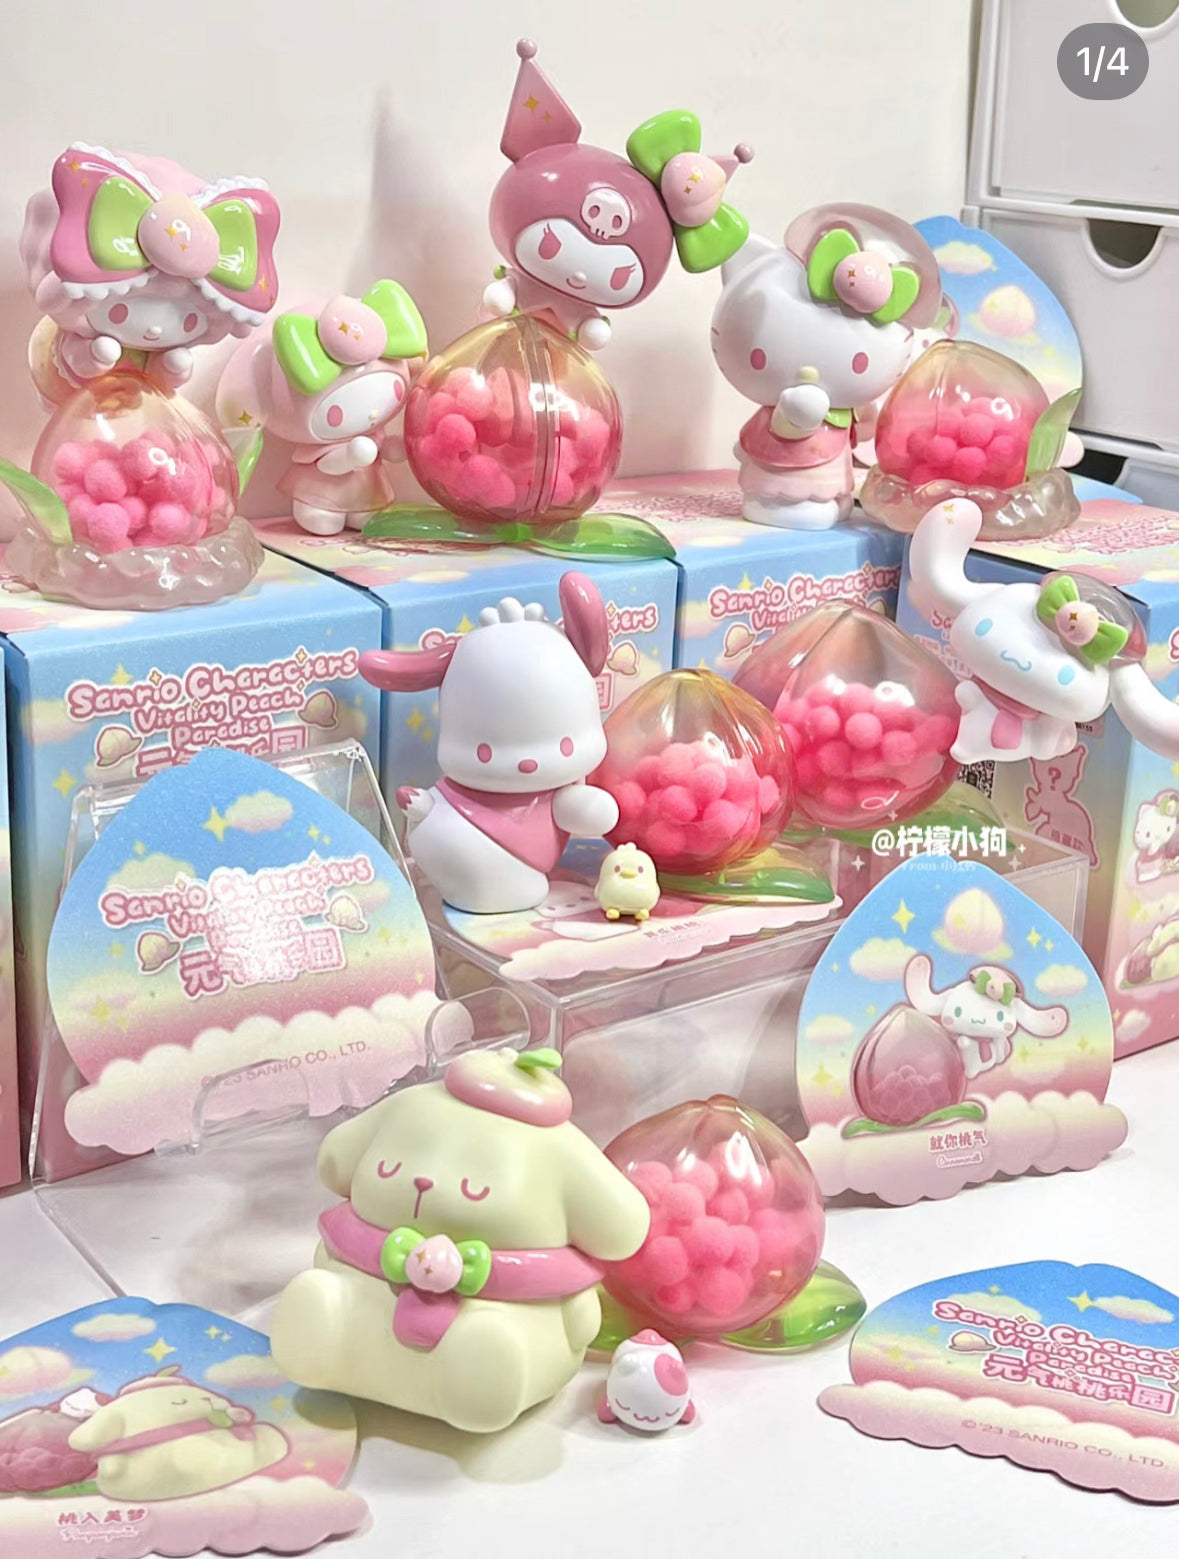 Vitality Peach Paradise Collection Blind Box （6 in 1)